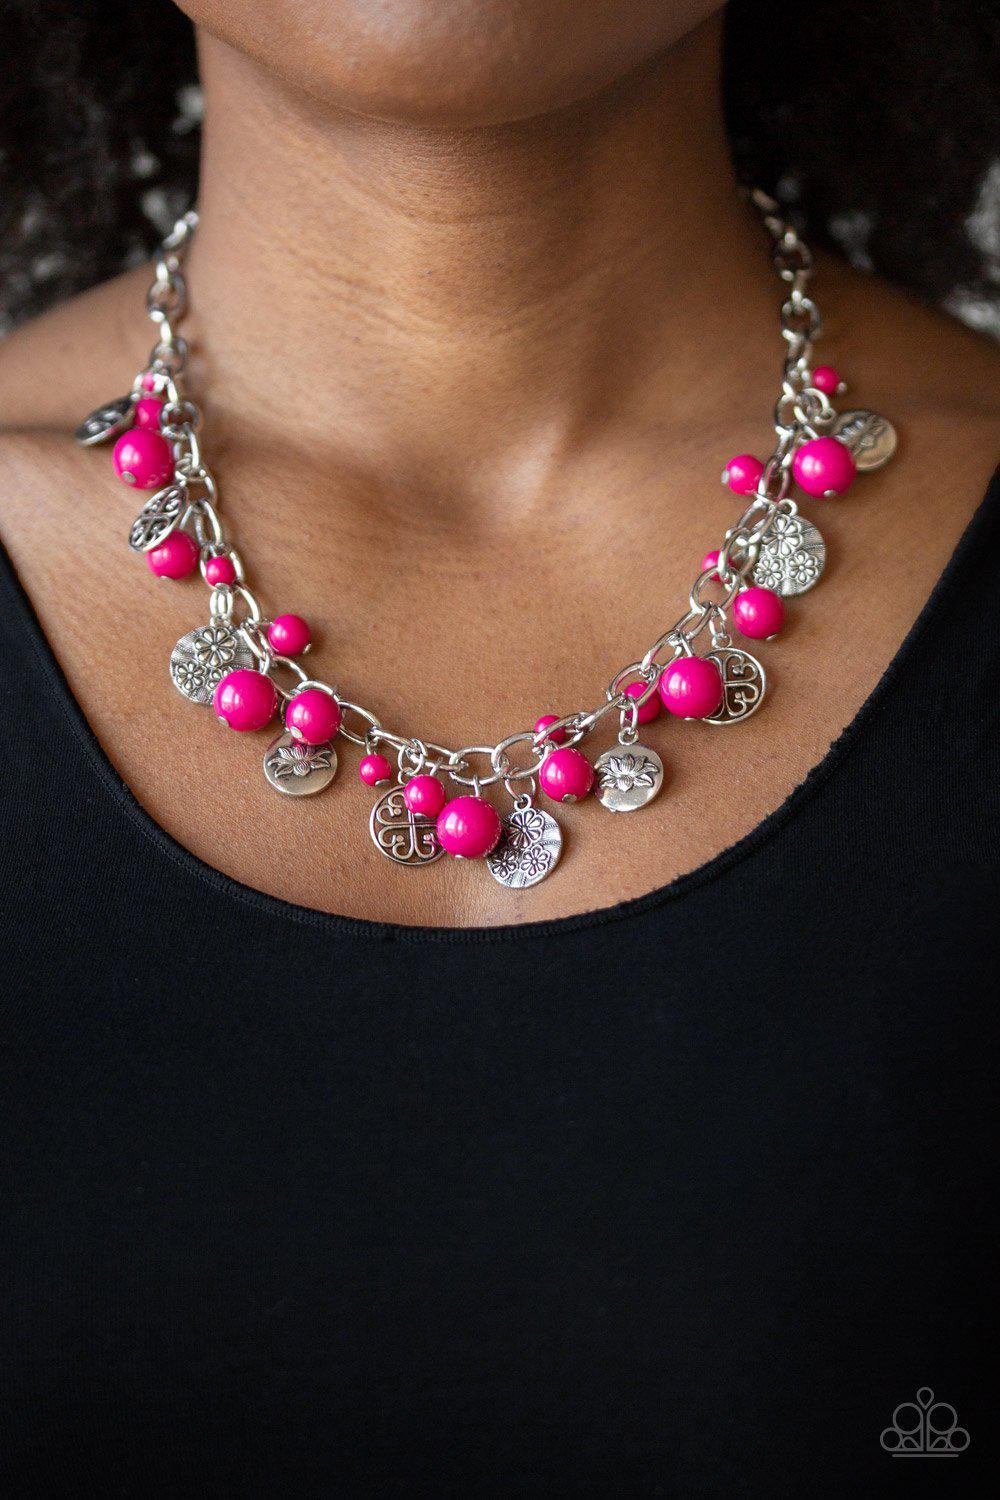 Guru Garden Pink and Silver Flower Charm Necklace - Paparazzi Accessories-CarasShop.com - $5 Jewelry by Cara Jewels